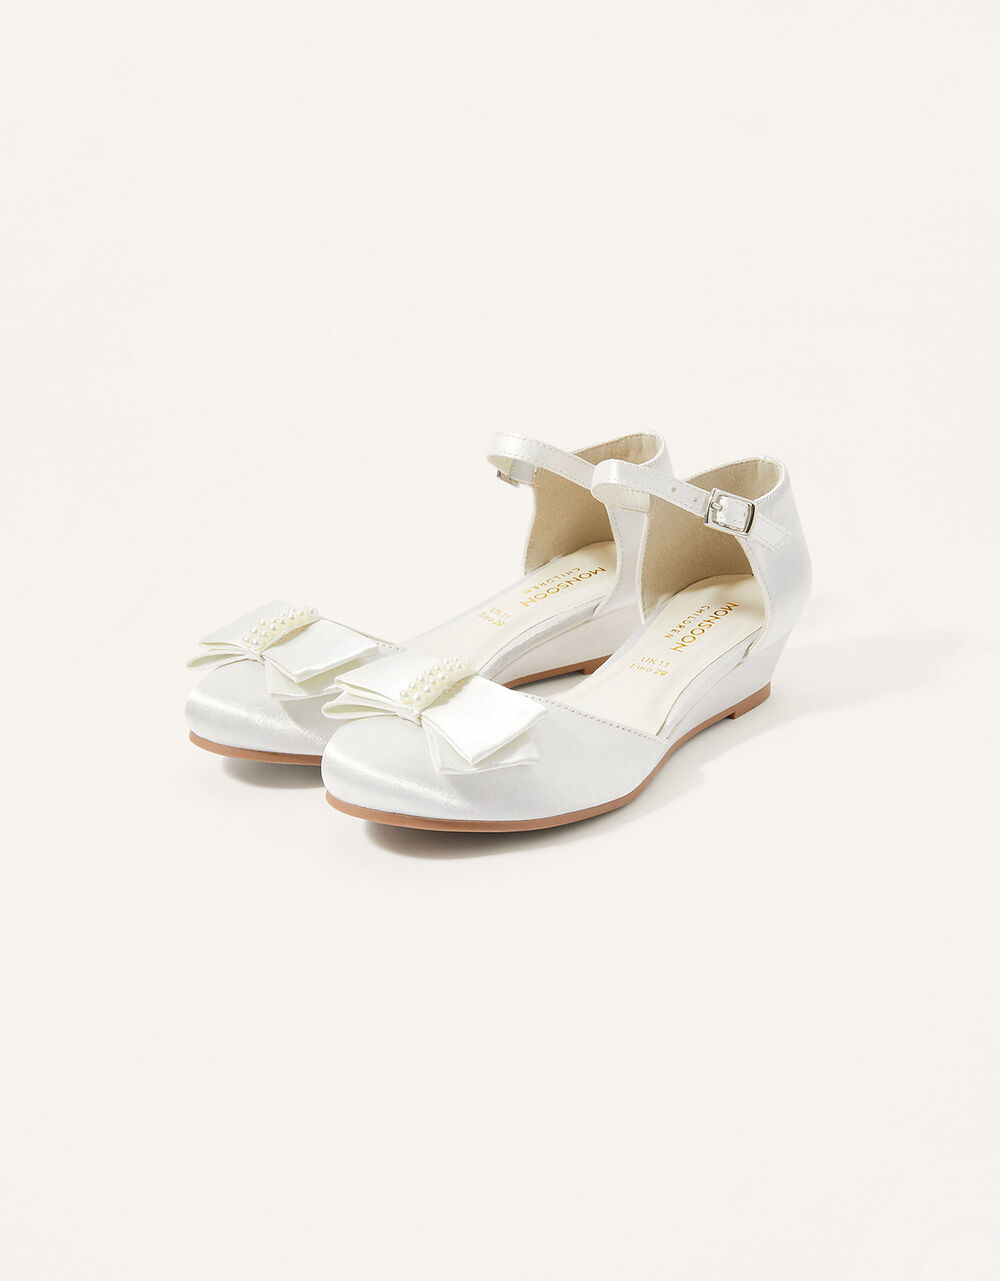 Children Children's Shoes & Sandals | Satin Pearl Bow Wedges Ivory - DN13786